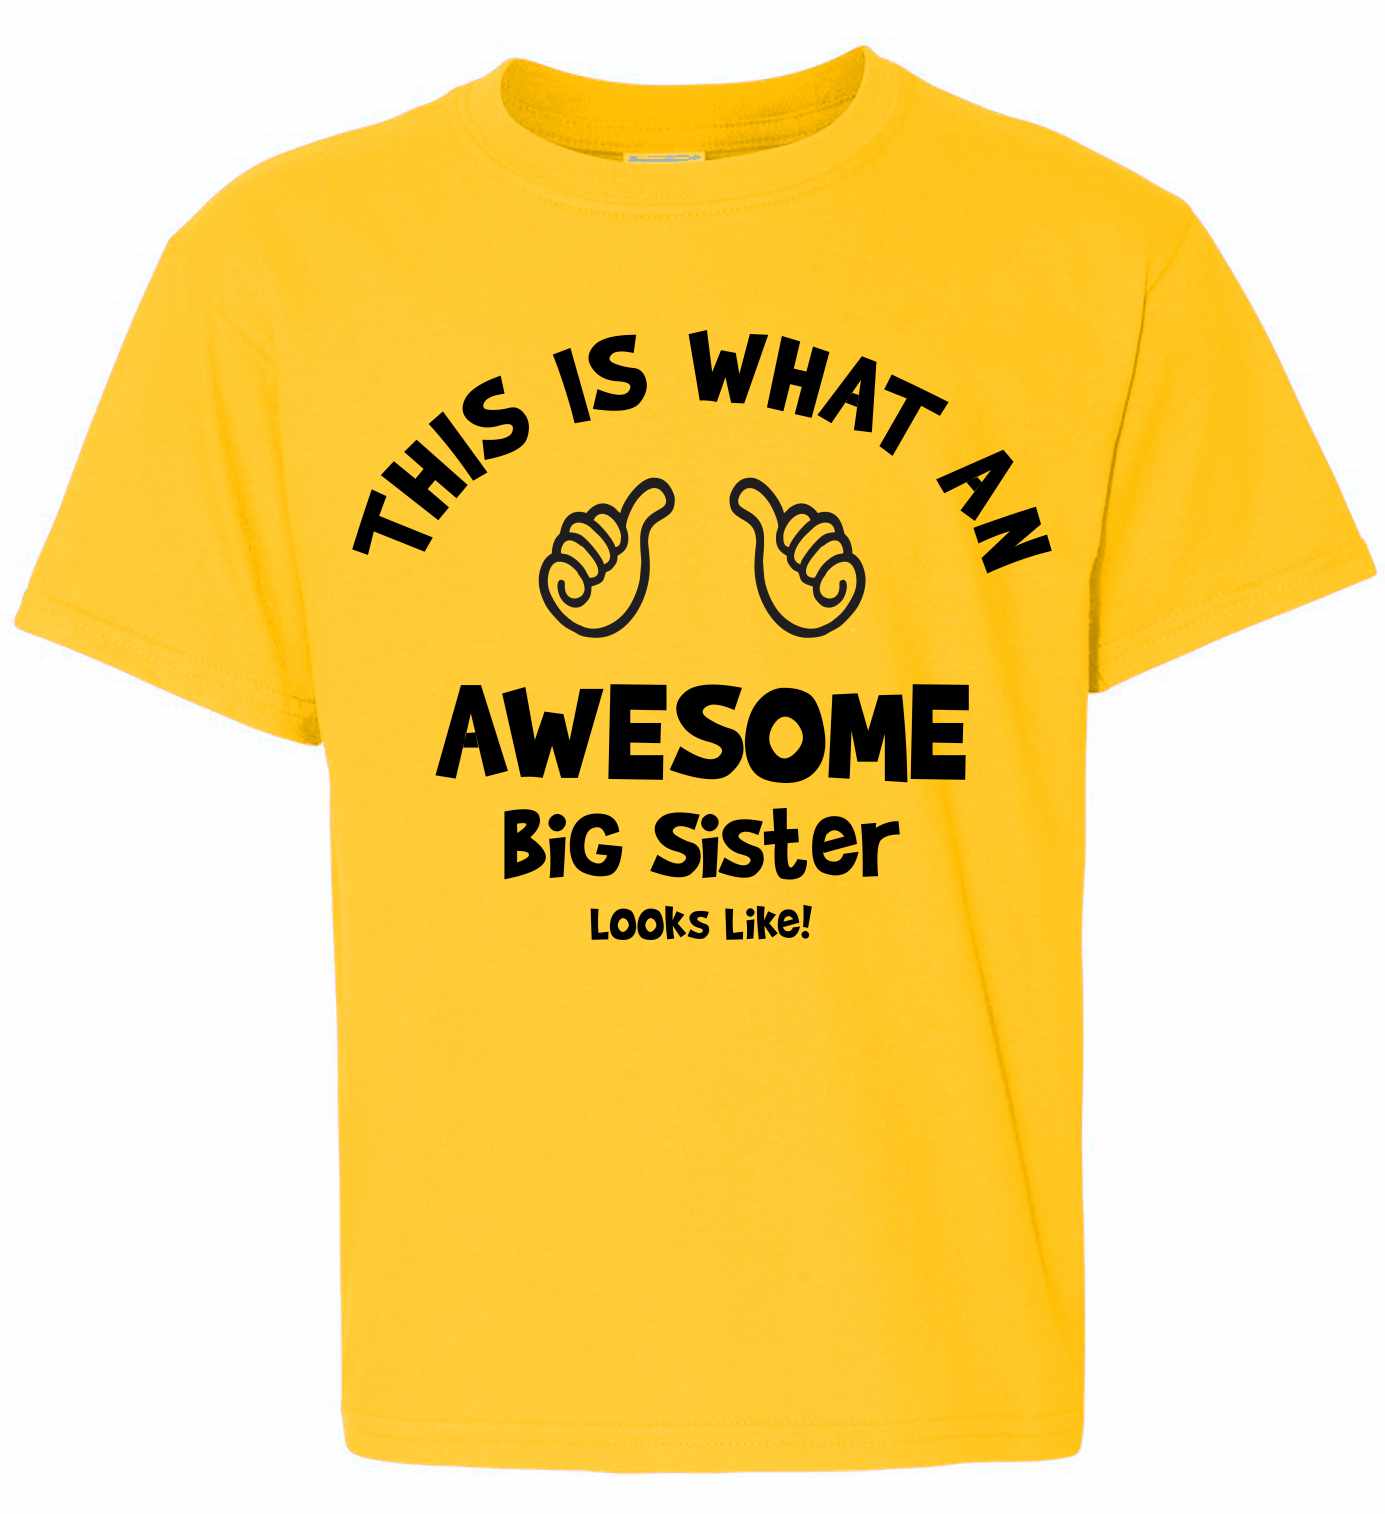 This is What an AWESOME BIG SISTER Looks Like on Kids T-Shirt